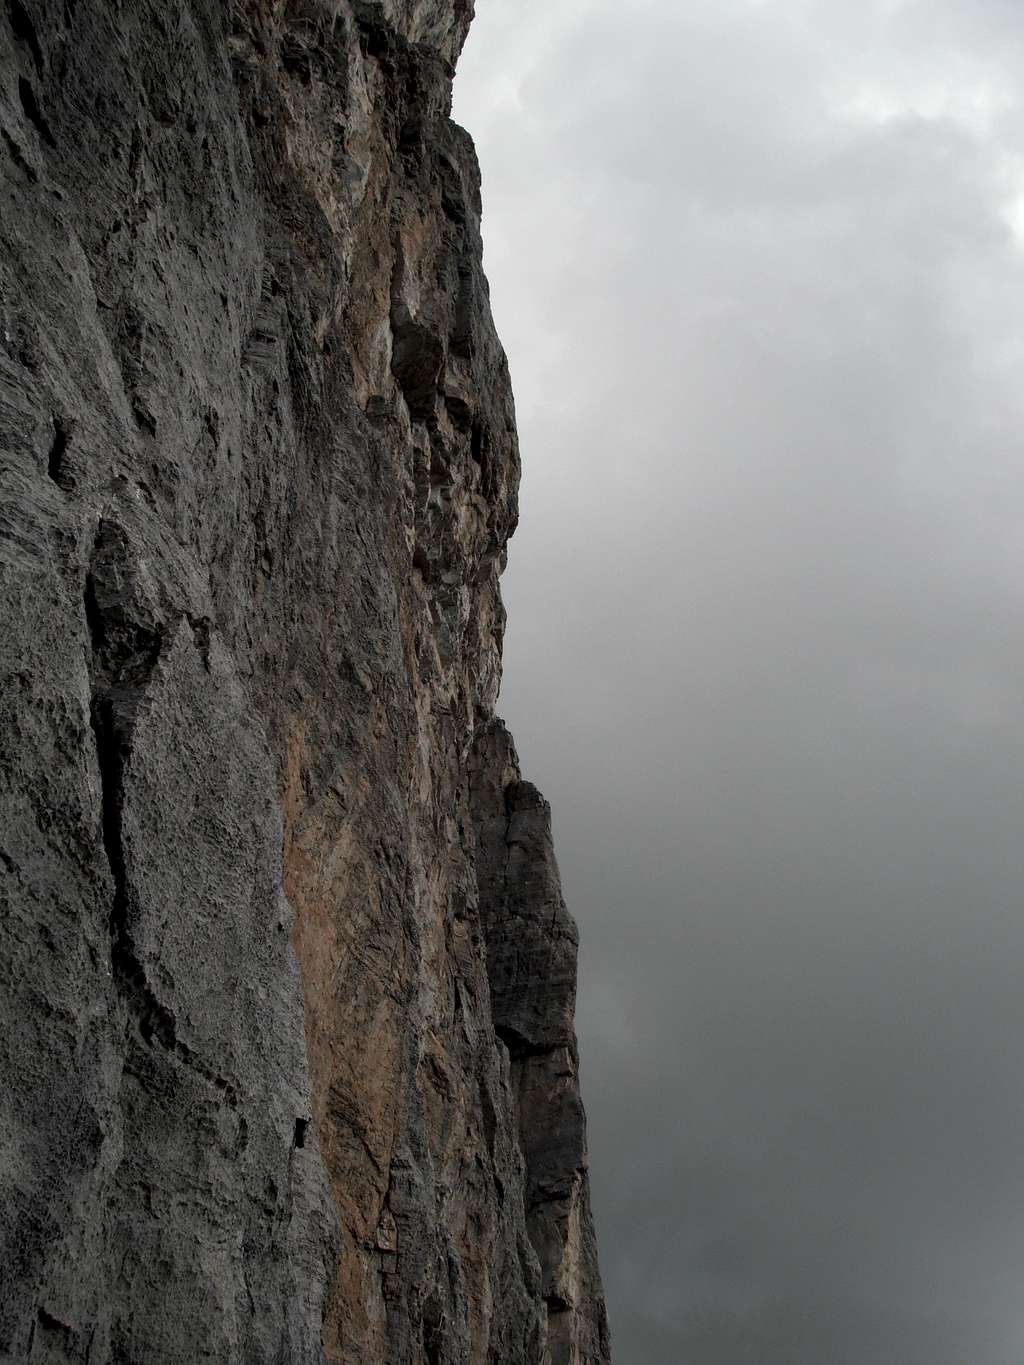 Jazz Beat of the Nun's Groove, 5.10a